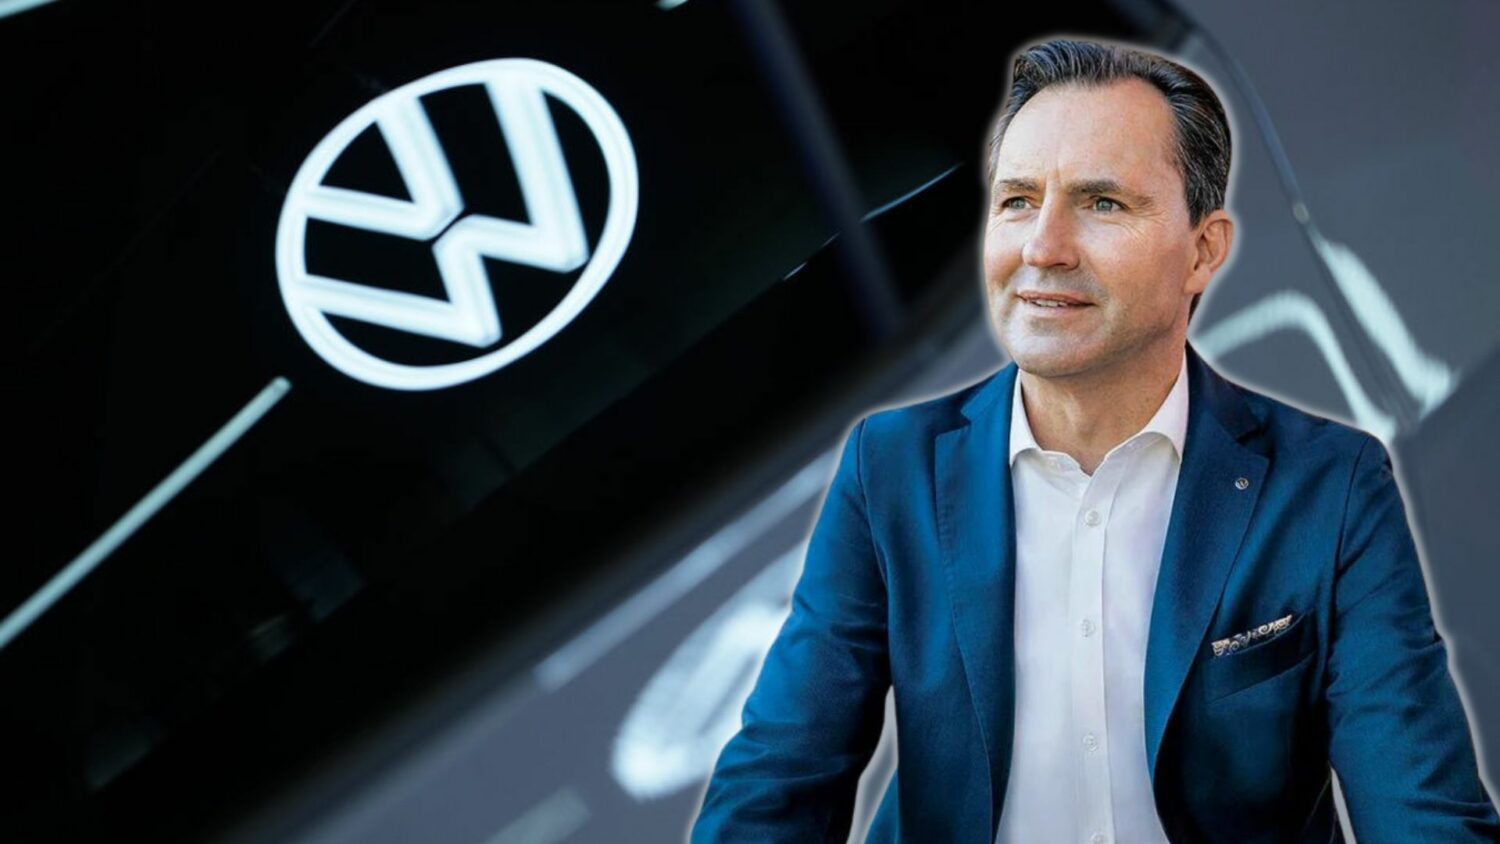 CEO of the VW brand, pledged to make vehicles easier for passengers and drivers, claiming touch-sensitive controls "did a lot of damage."